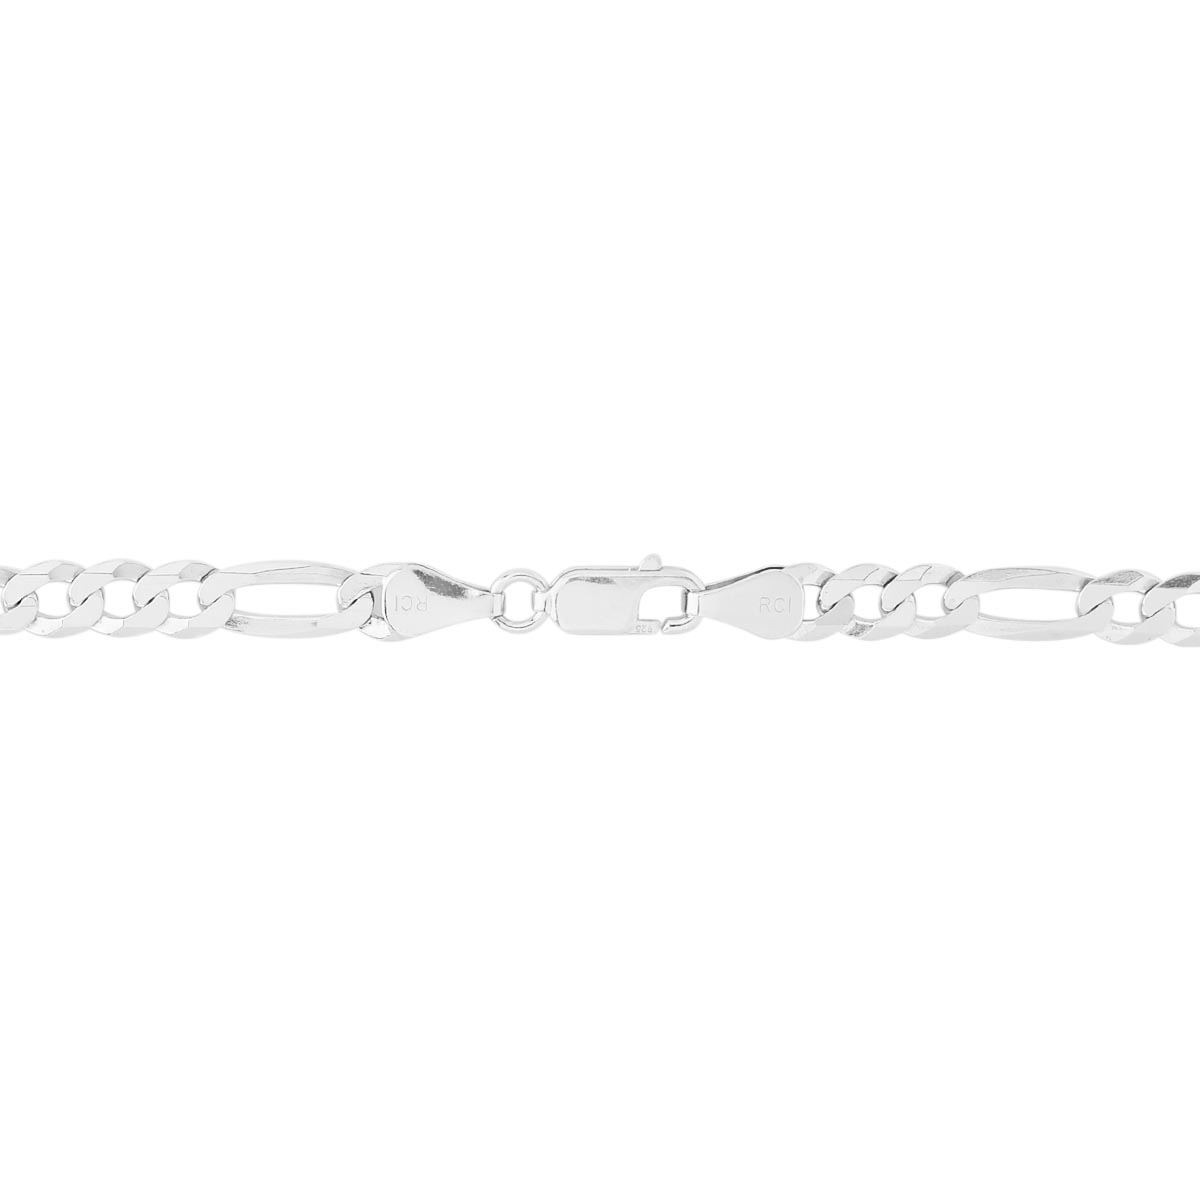 Figaro Chain in Sterling Silver (24 inches and 5mm)